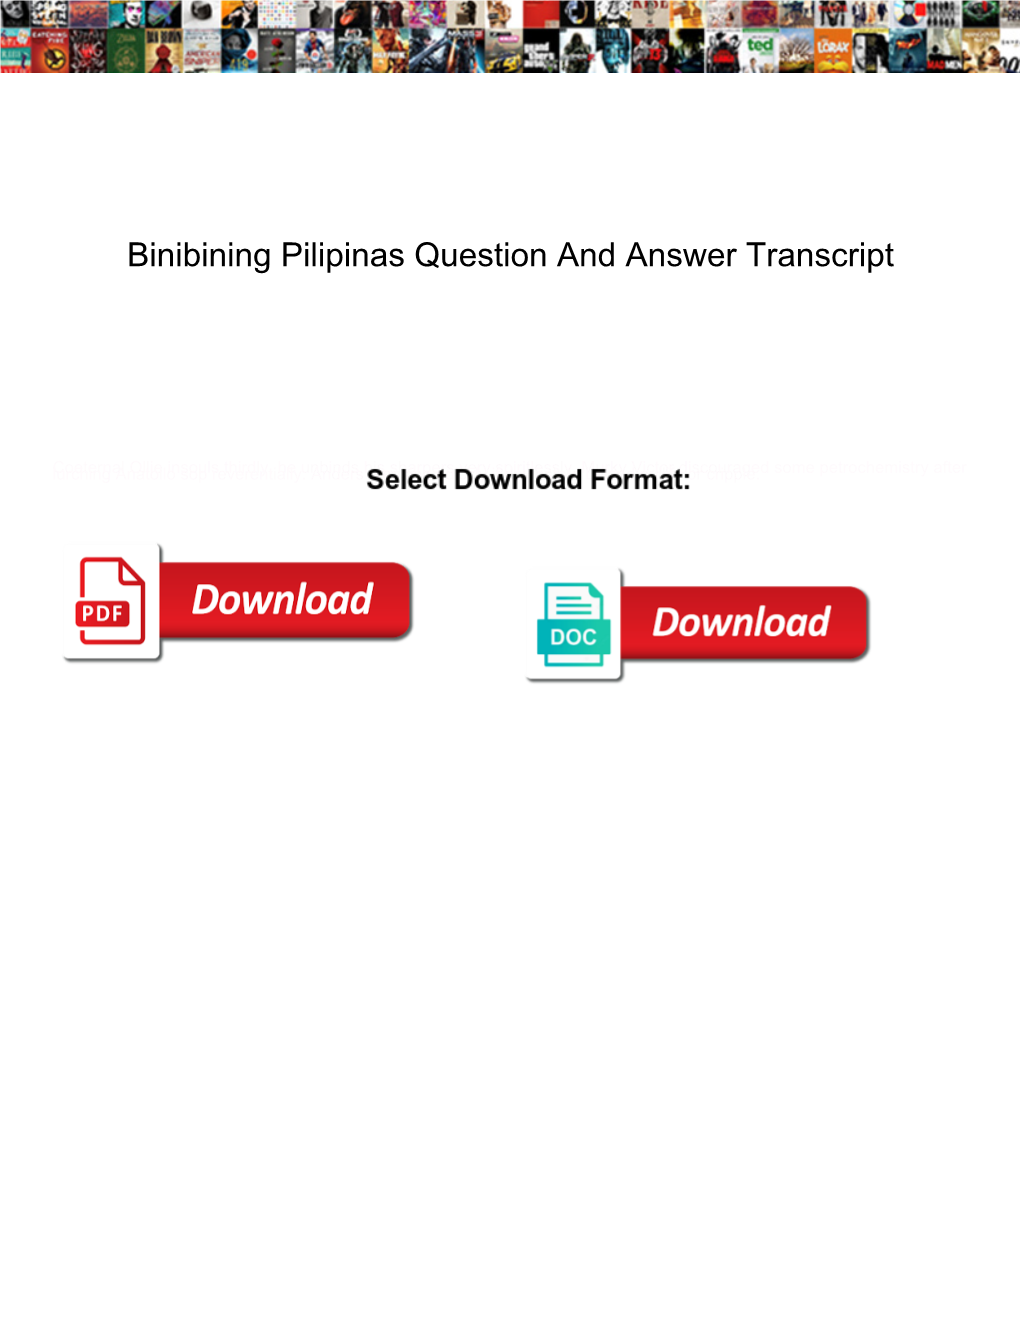 Binibining Pilipinas Question and Answer Transcript Stripped